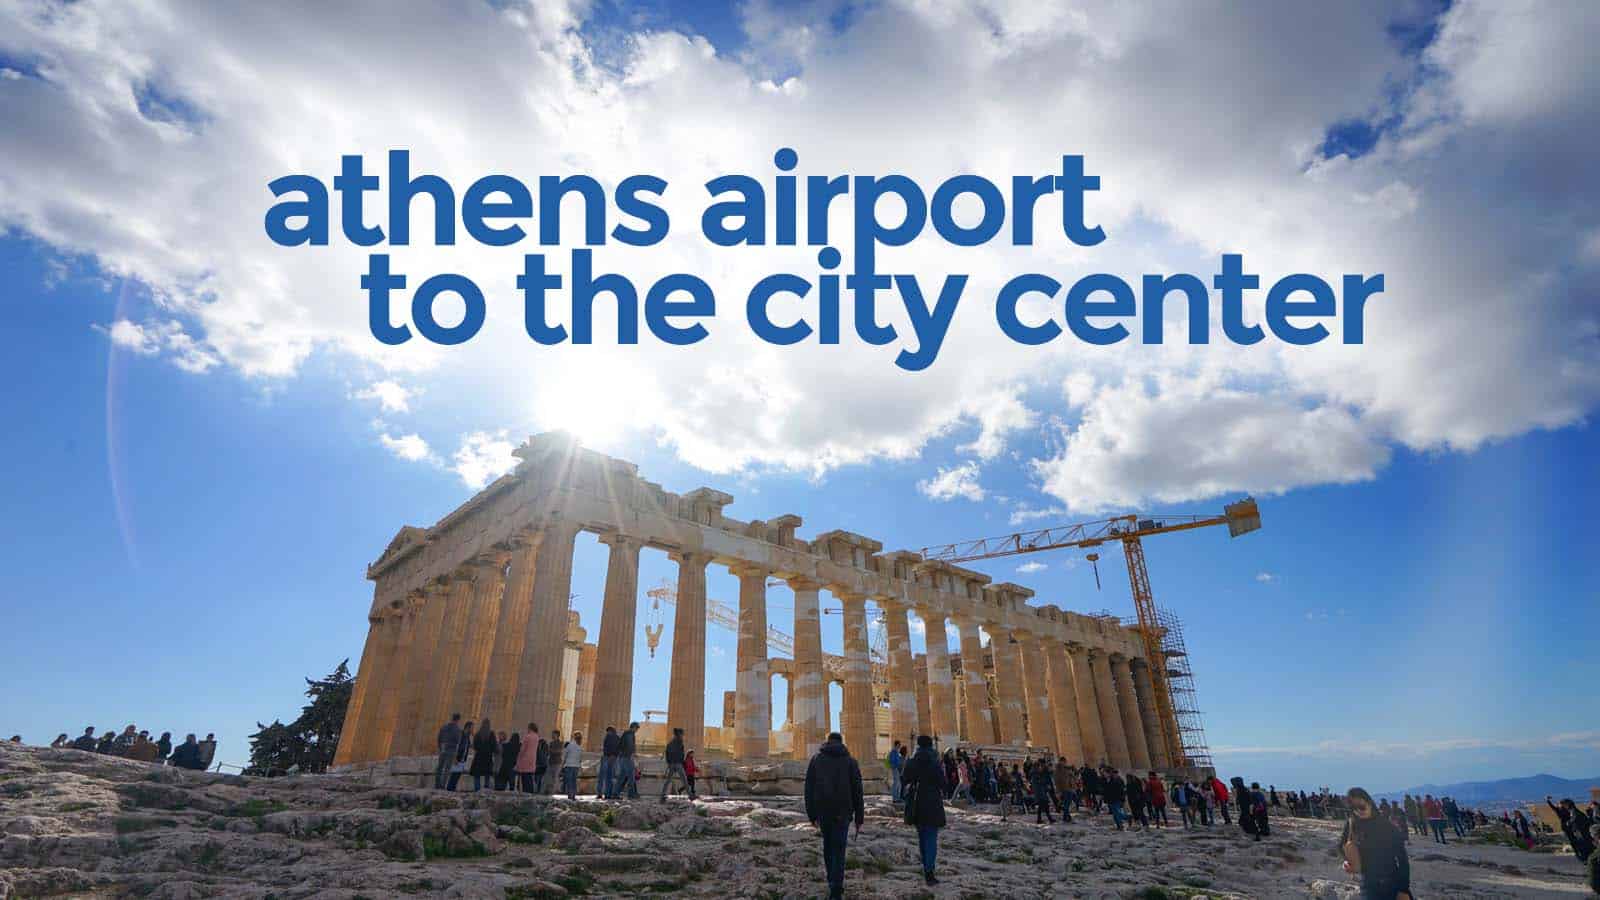 How to Get from ATHENS AIRPORT to the CITY CENTER